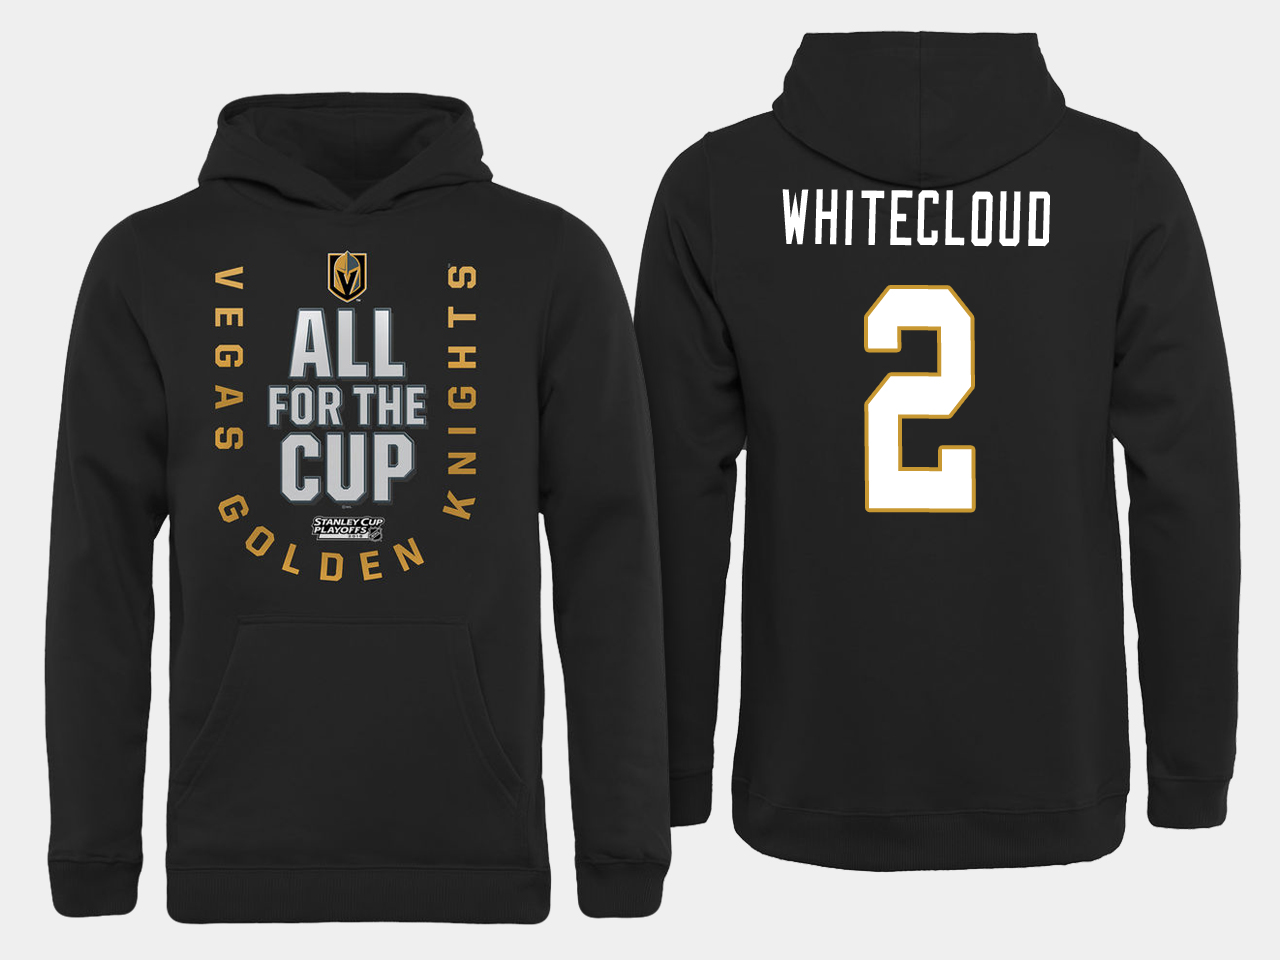 Men NHL Vegas Golden Knights #2 Whitecloud All for the Cup hoodie->more nhl jerseys->NHL Jersey